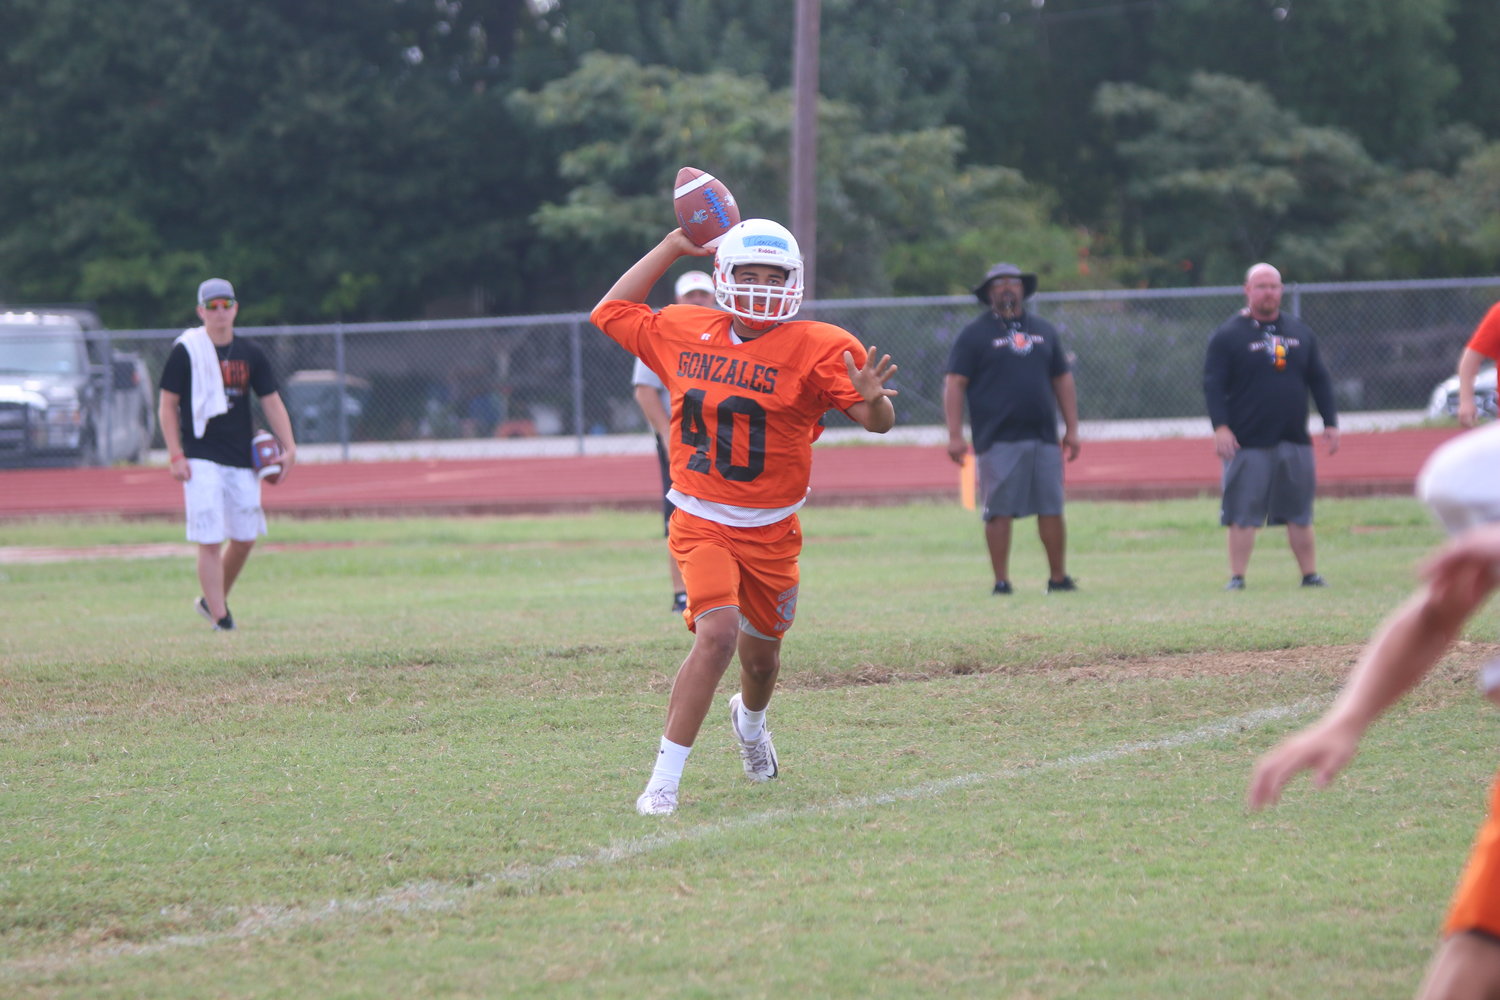 The Gonzales Apaches held their annual scrimmage at their practice field last Saturday, with sub-varsity players competing against each other and later varsity players competing against each other.